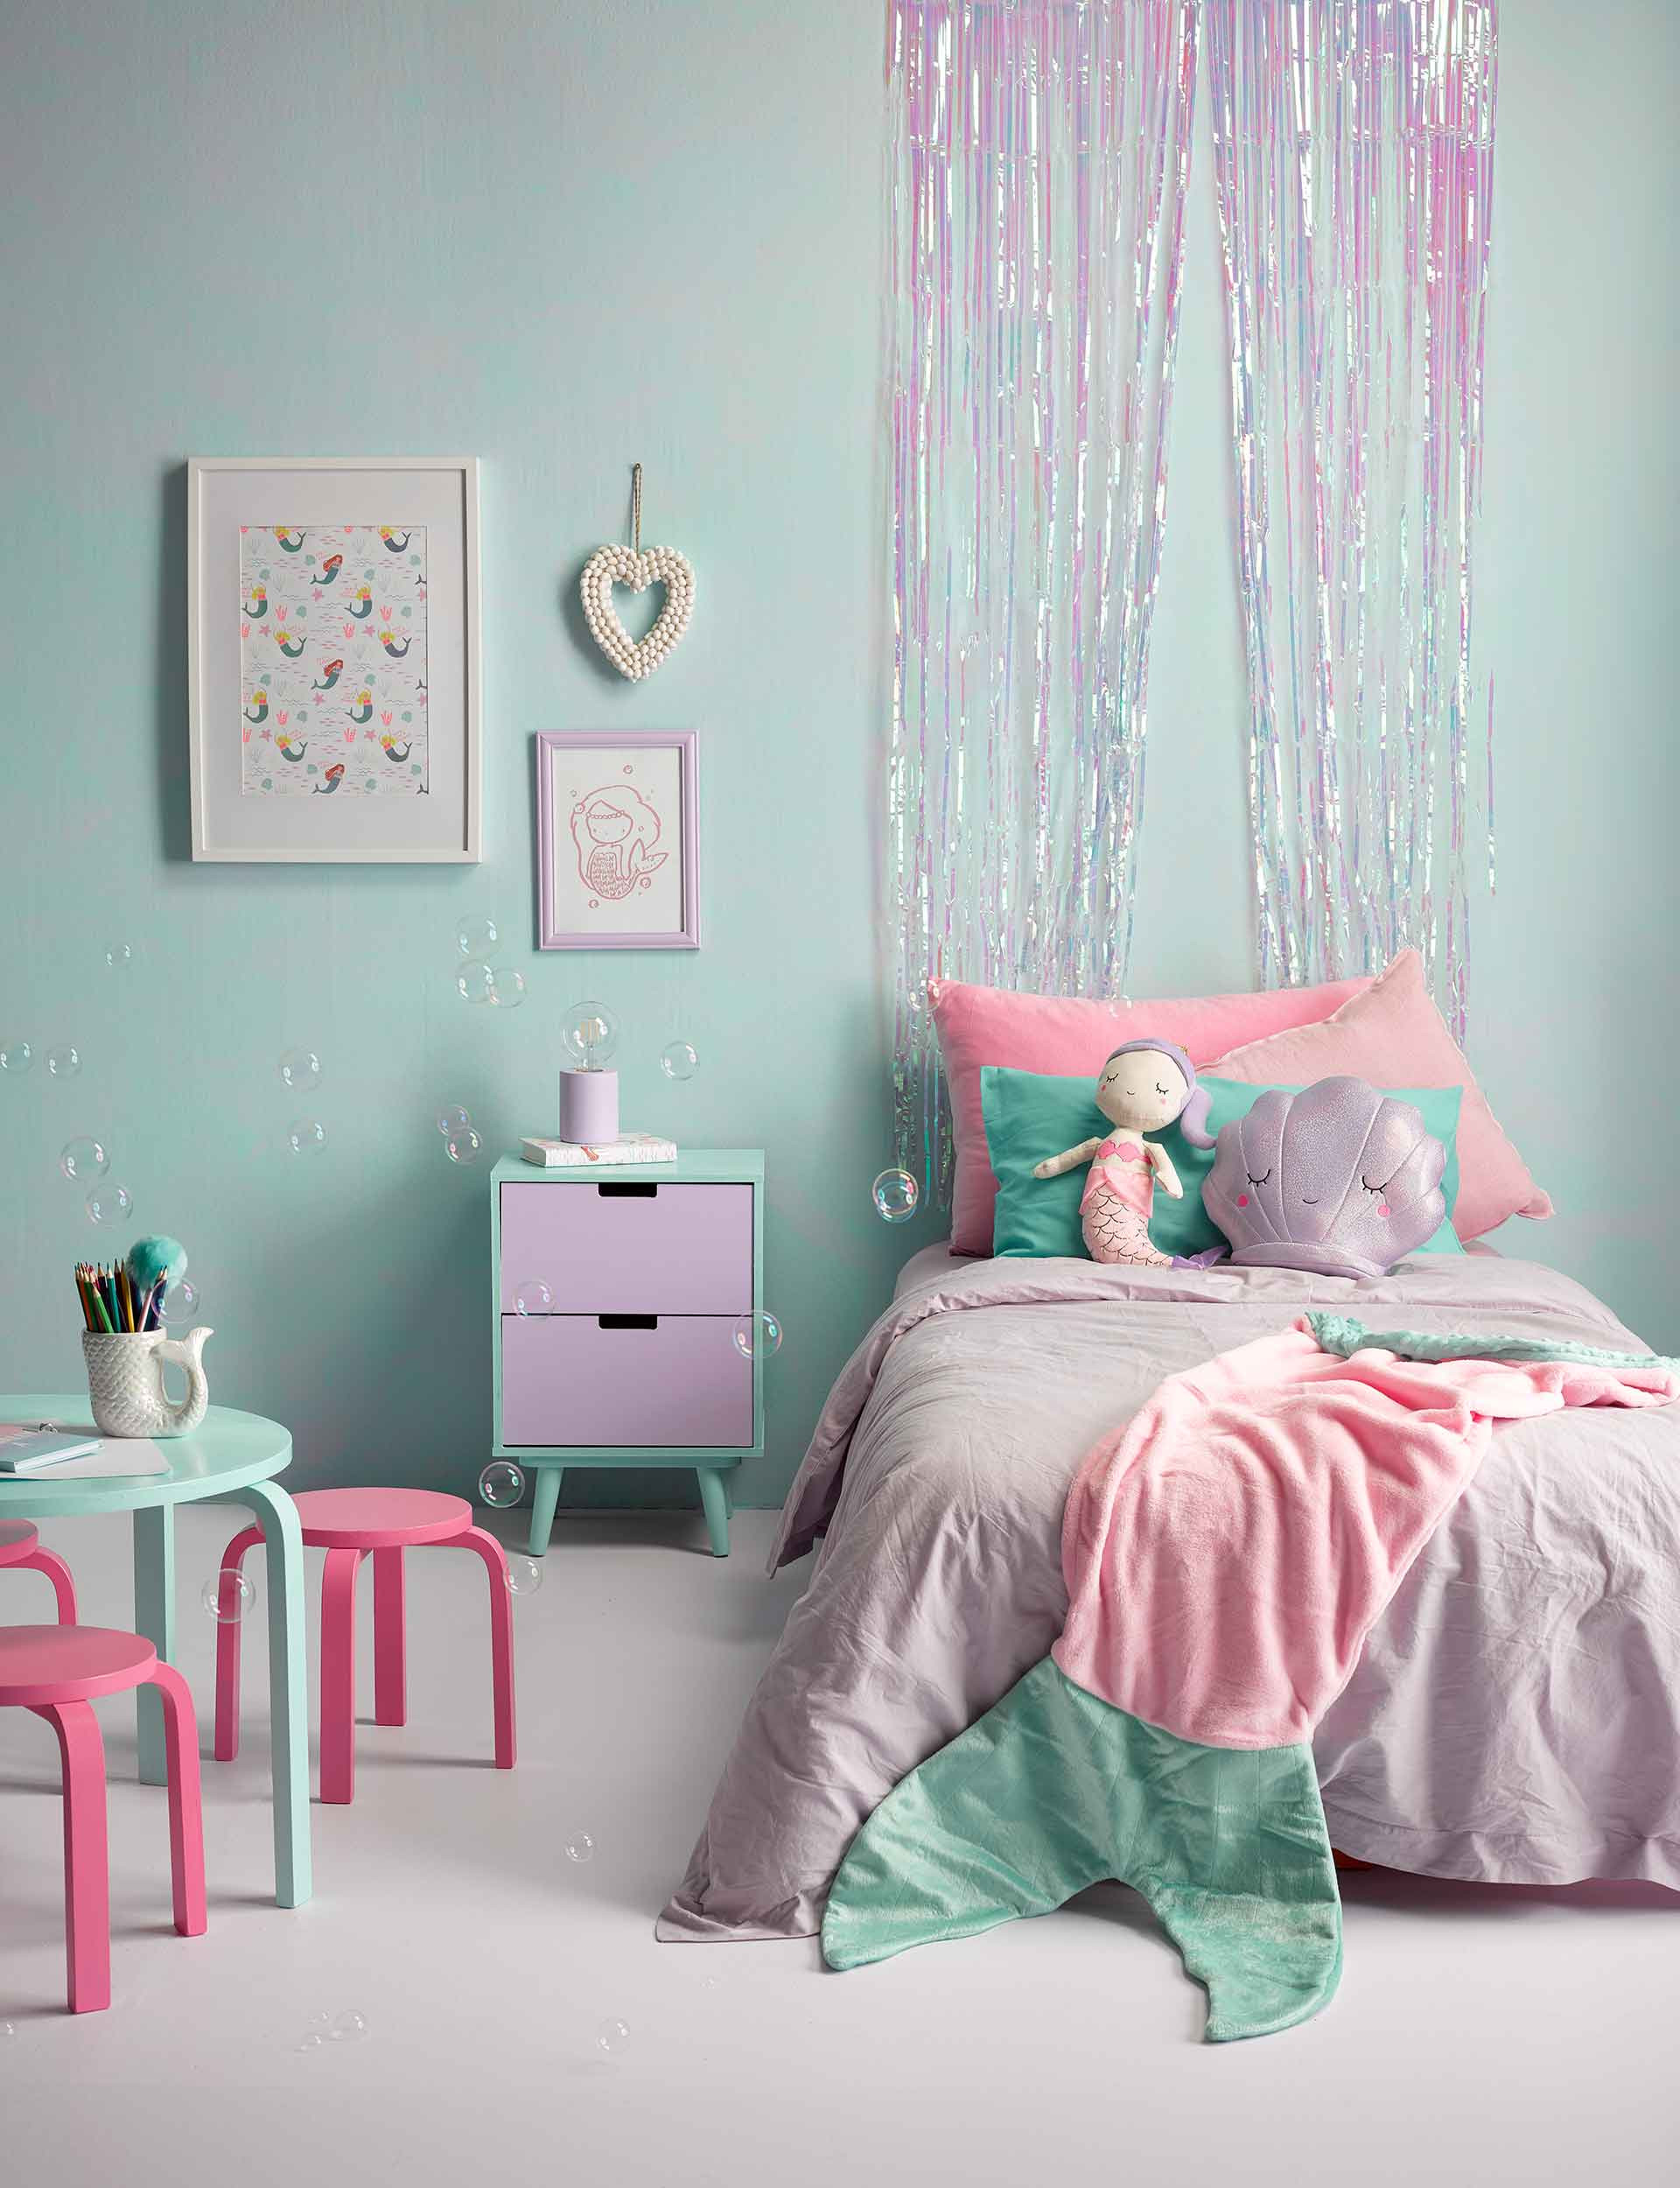 Mermaid Decor For Kids Room
 How to give your kid s bedroom a mermaid inspired makeover